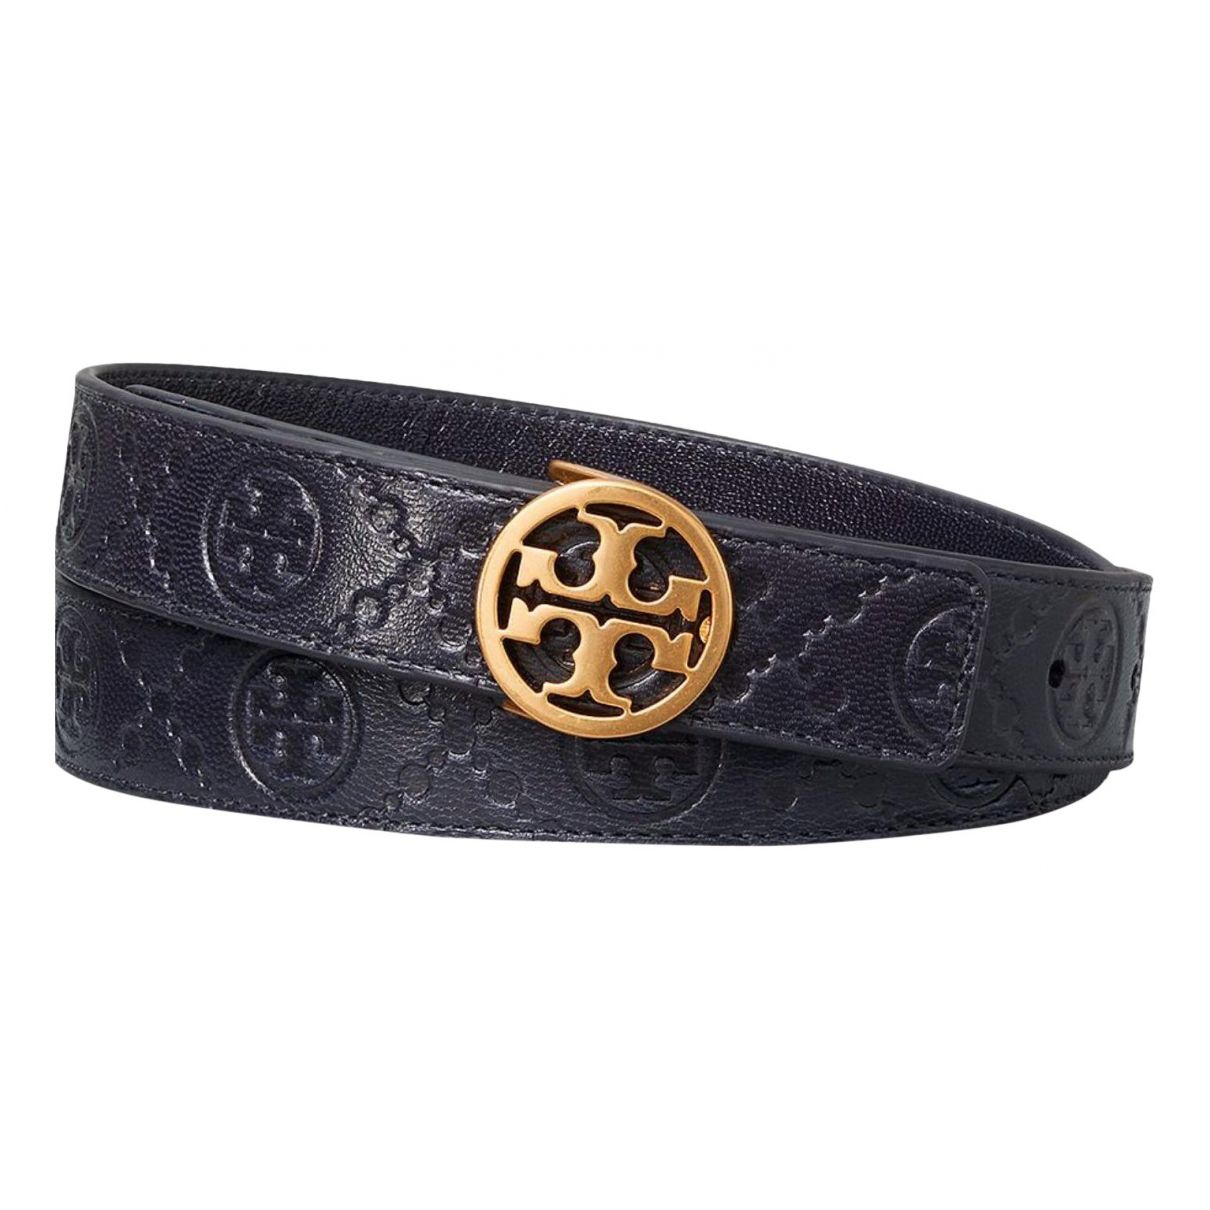 Leather belt Tory Burch Black size Not specified International in Leather -  24976687